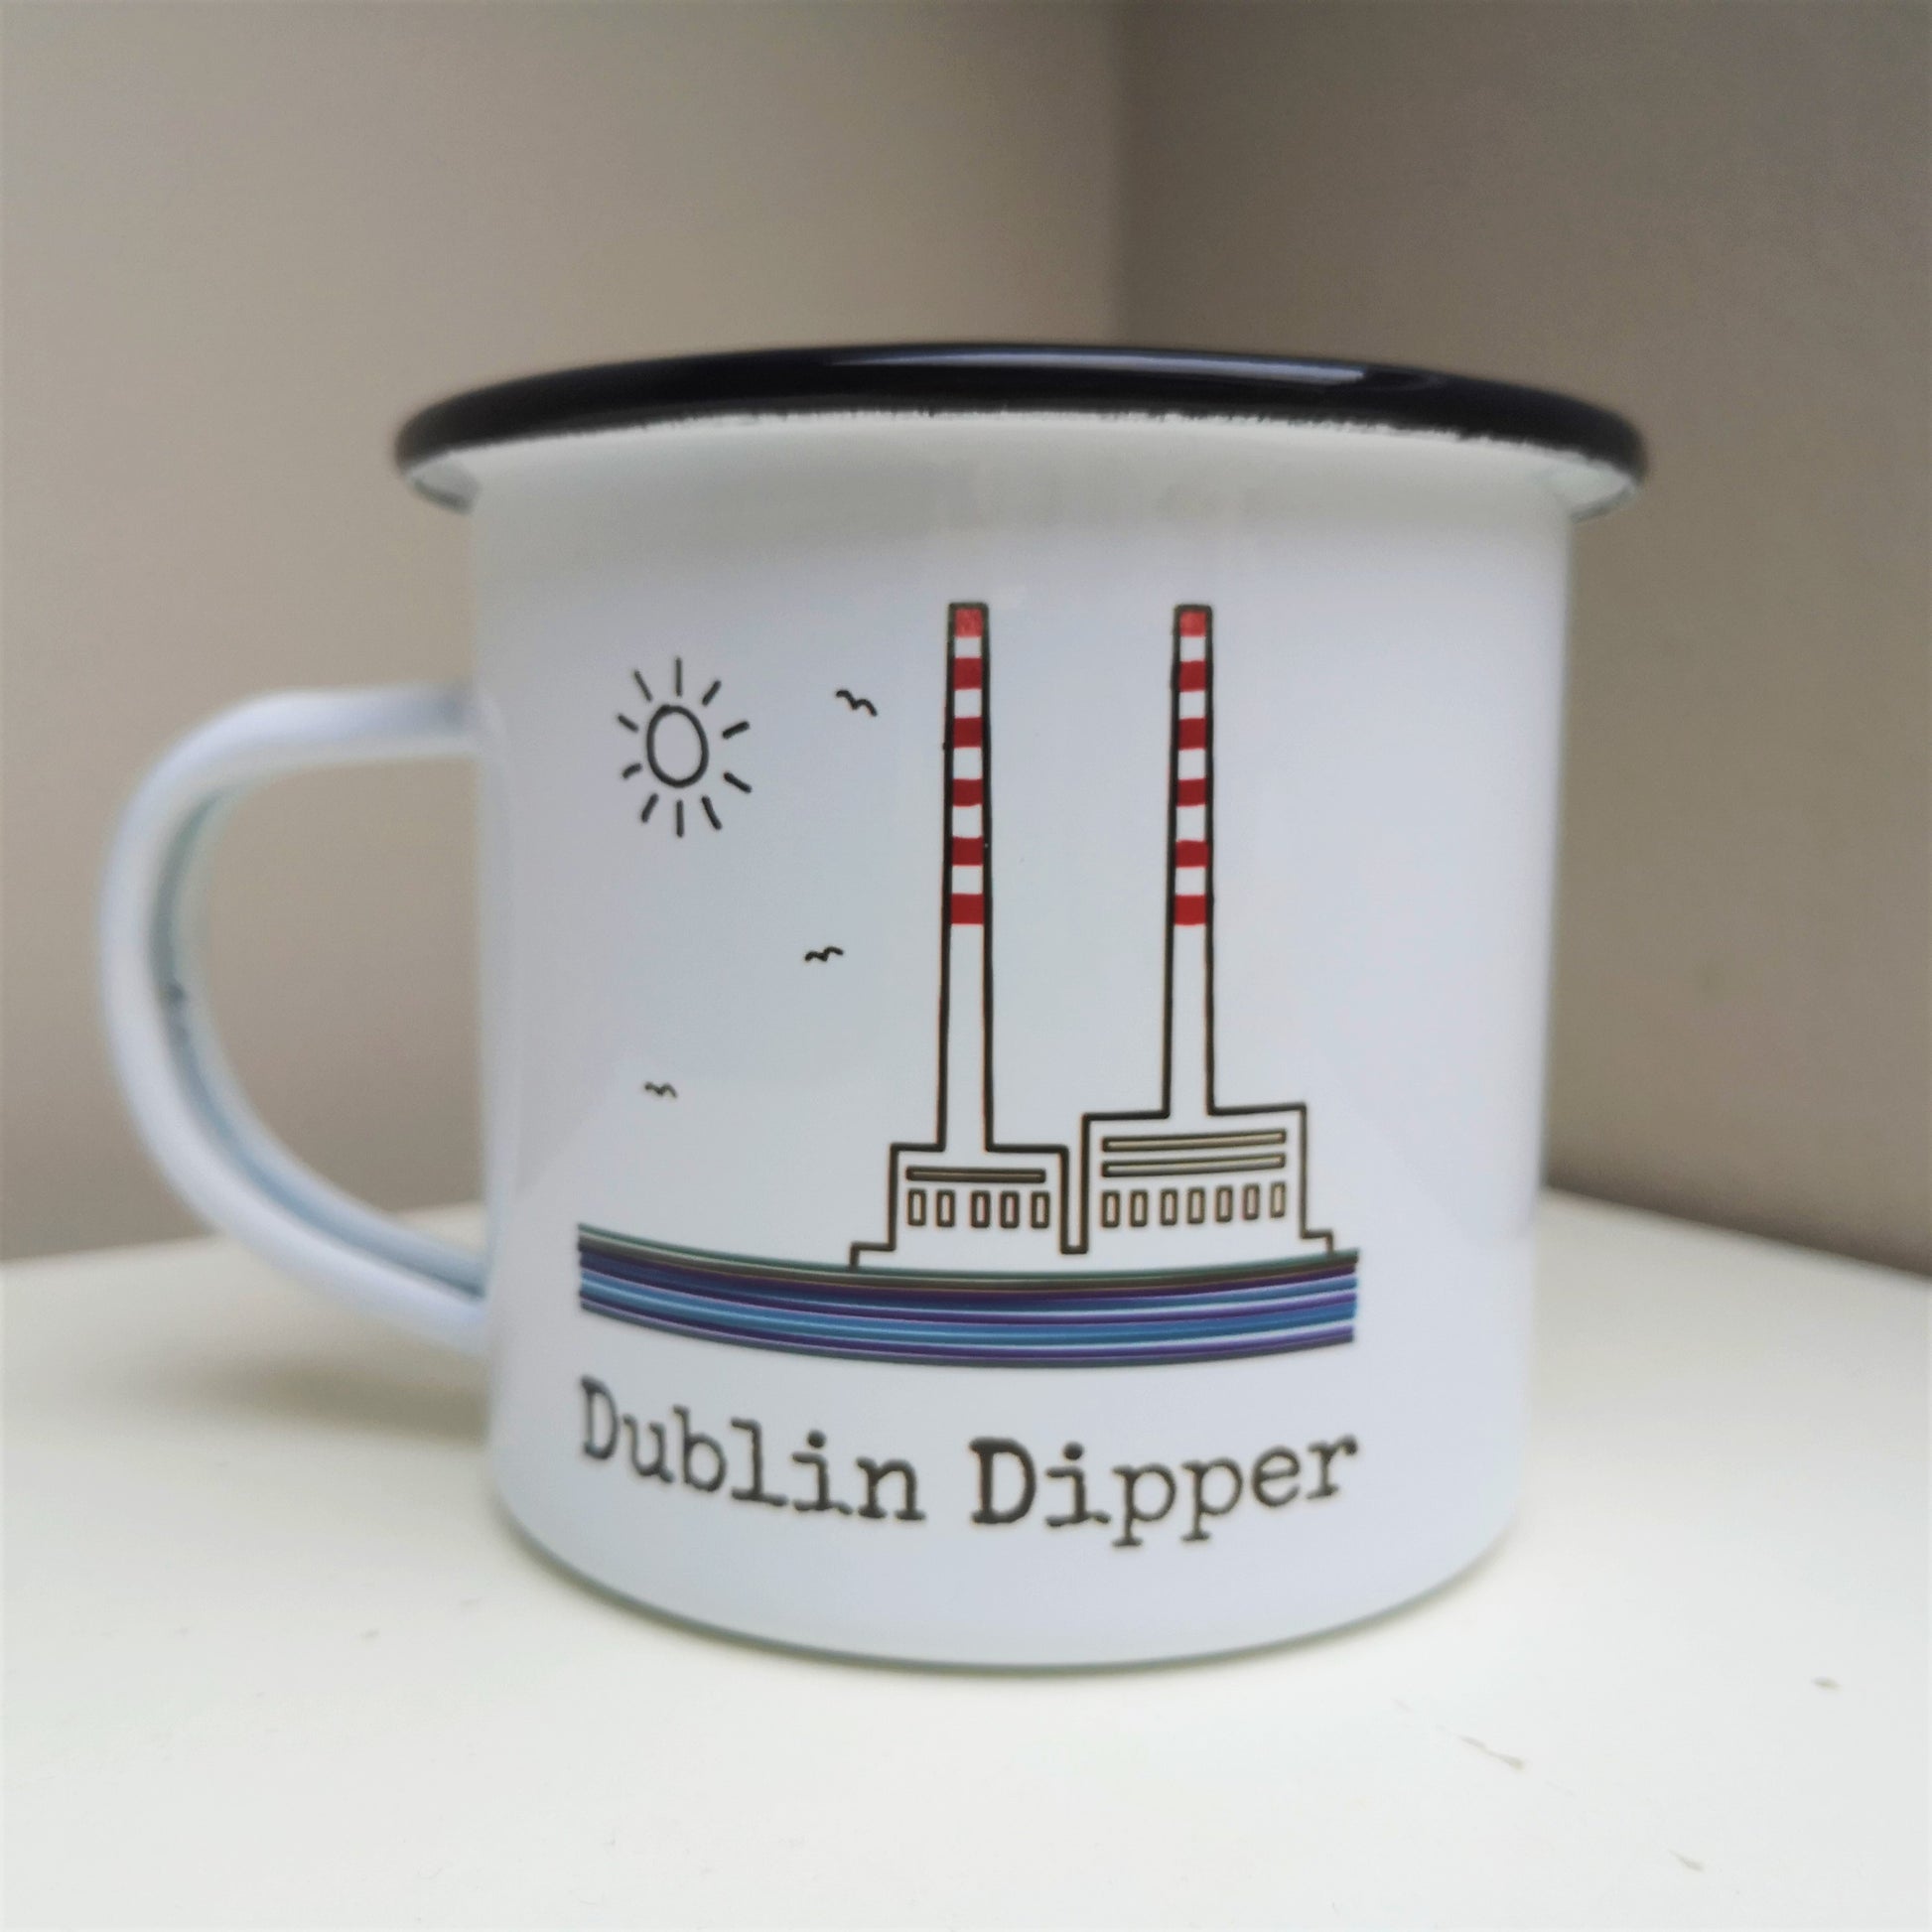 A white steel enamel mug with the poolbeg towers on it, with DUBLIN DIPPER written in type font below